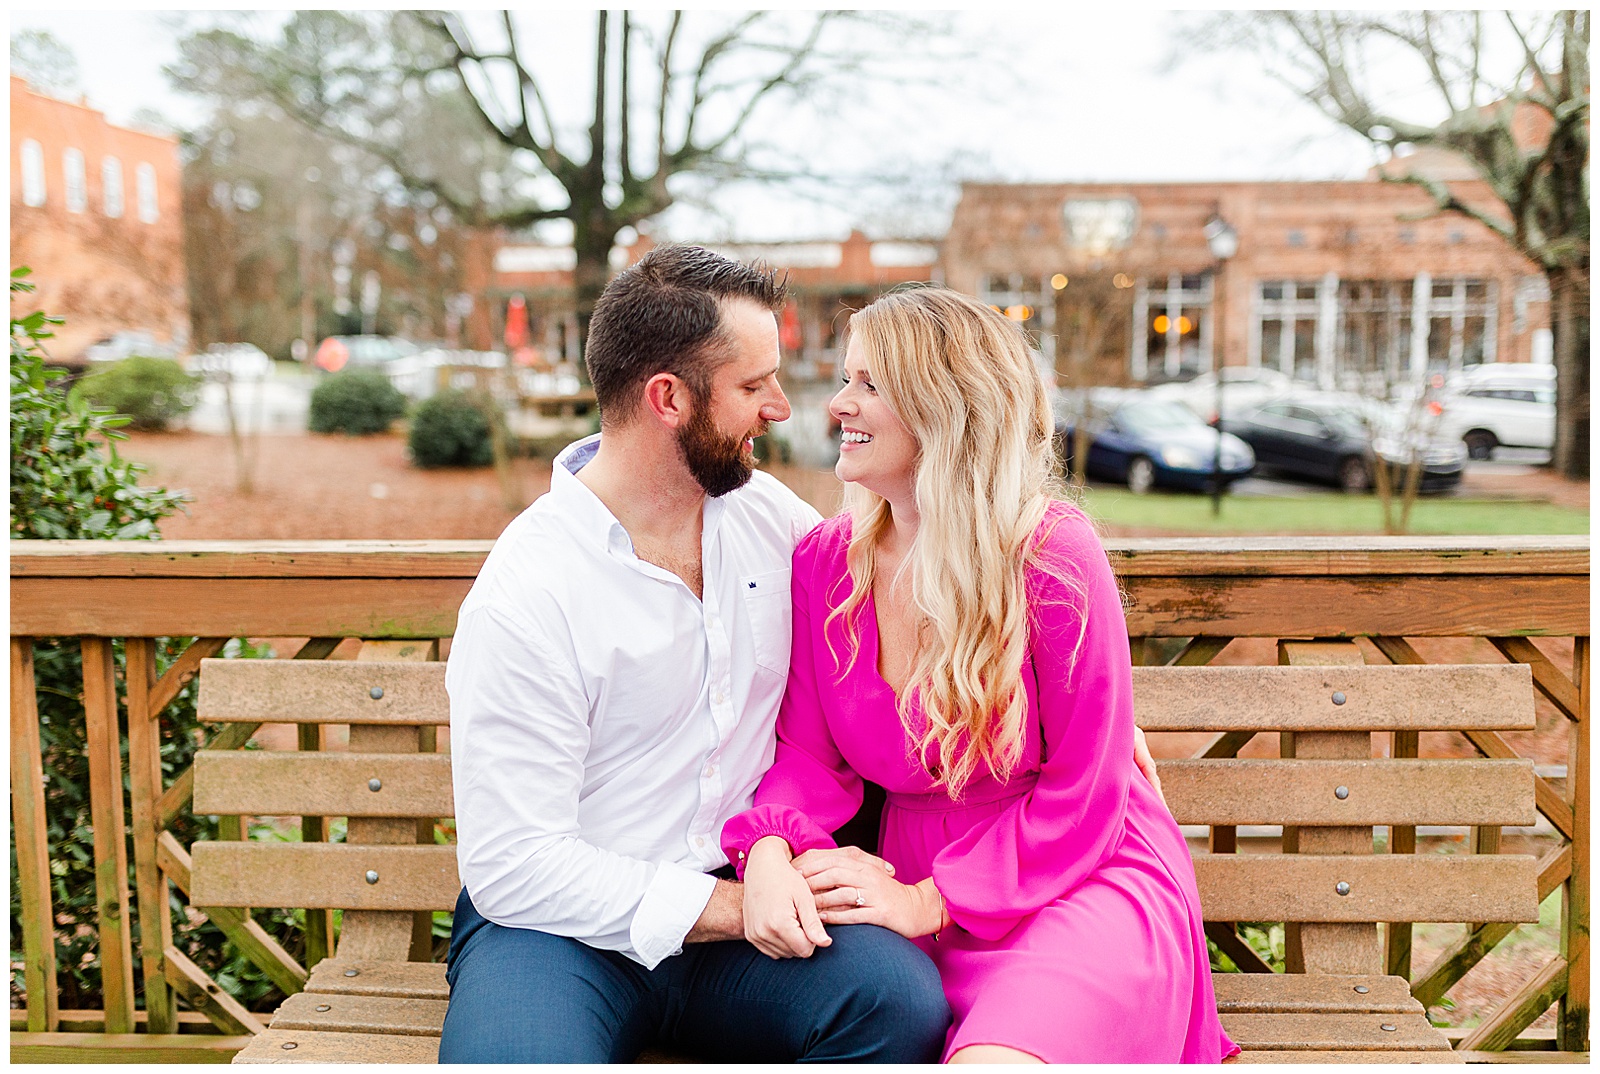 Adorable couple sitting on wooden bench in downtown Waxhaw, NC Engagement Session with Bright Hot Pink Dress Outfit Ideas